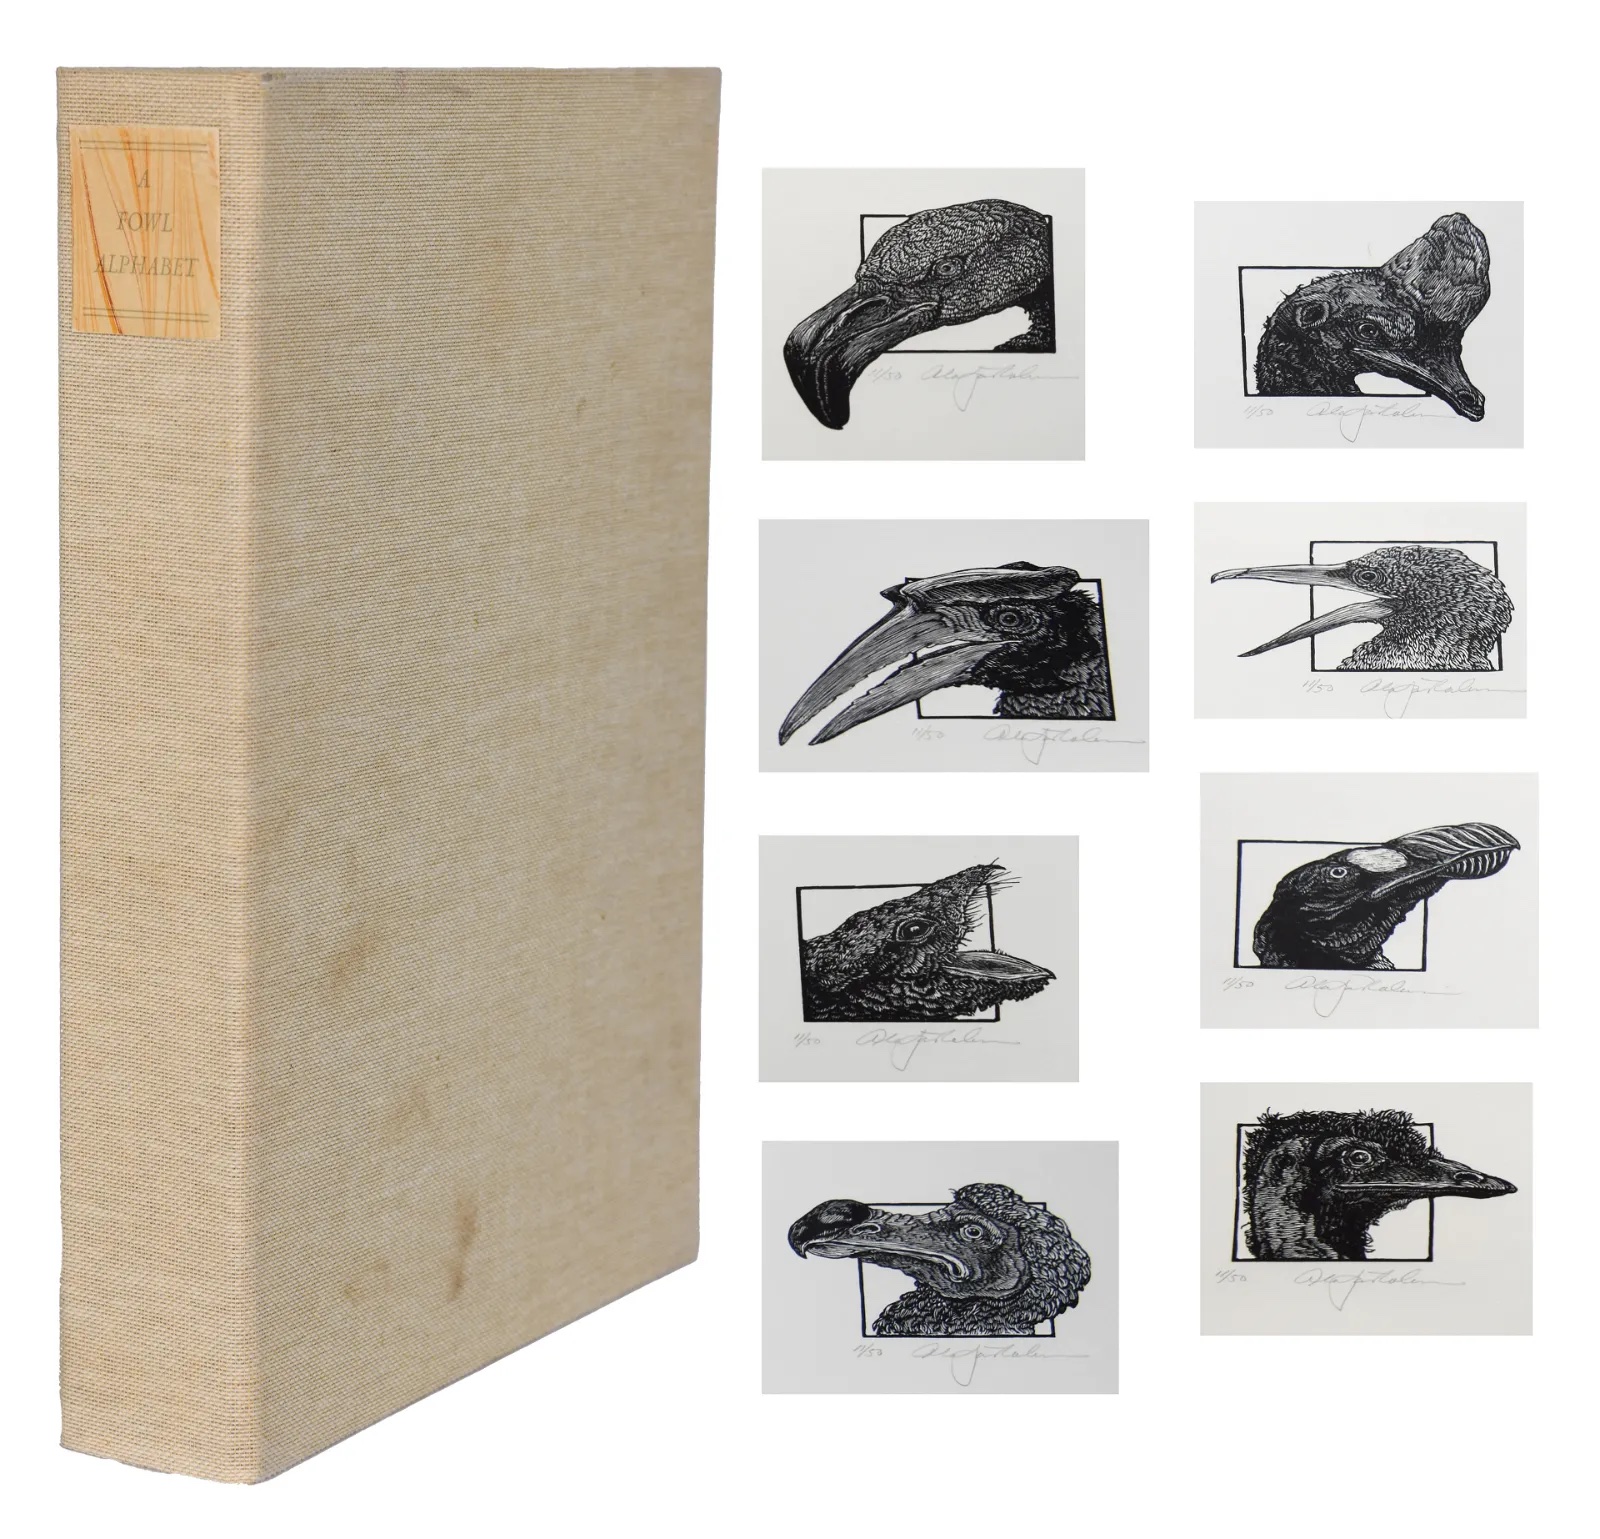 'A Fowl Alphabet', with 26 wood engravings by Alan James Robinson, estimated at $1,000-$2,000 at La Belle Epoque.